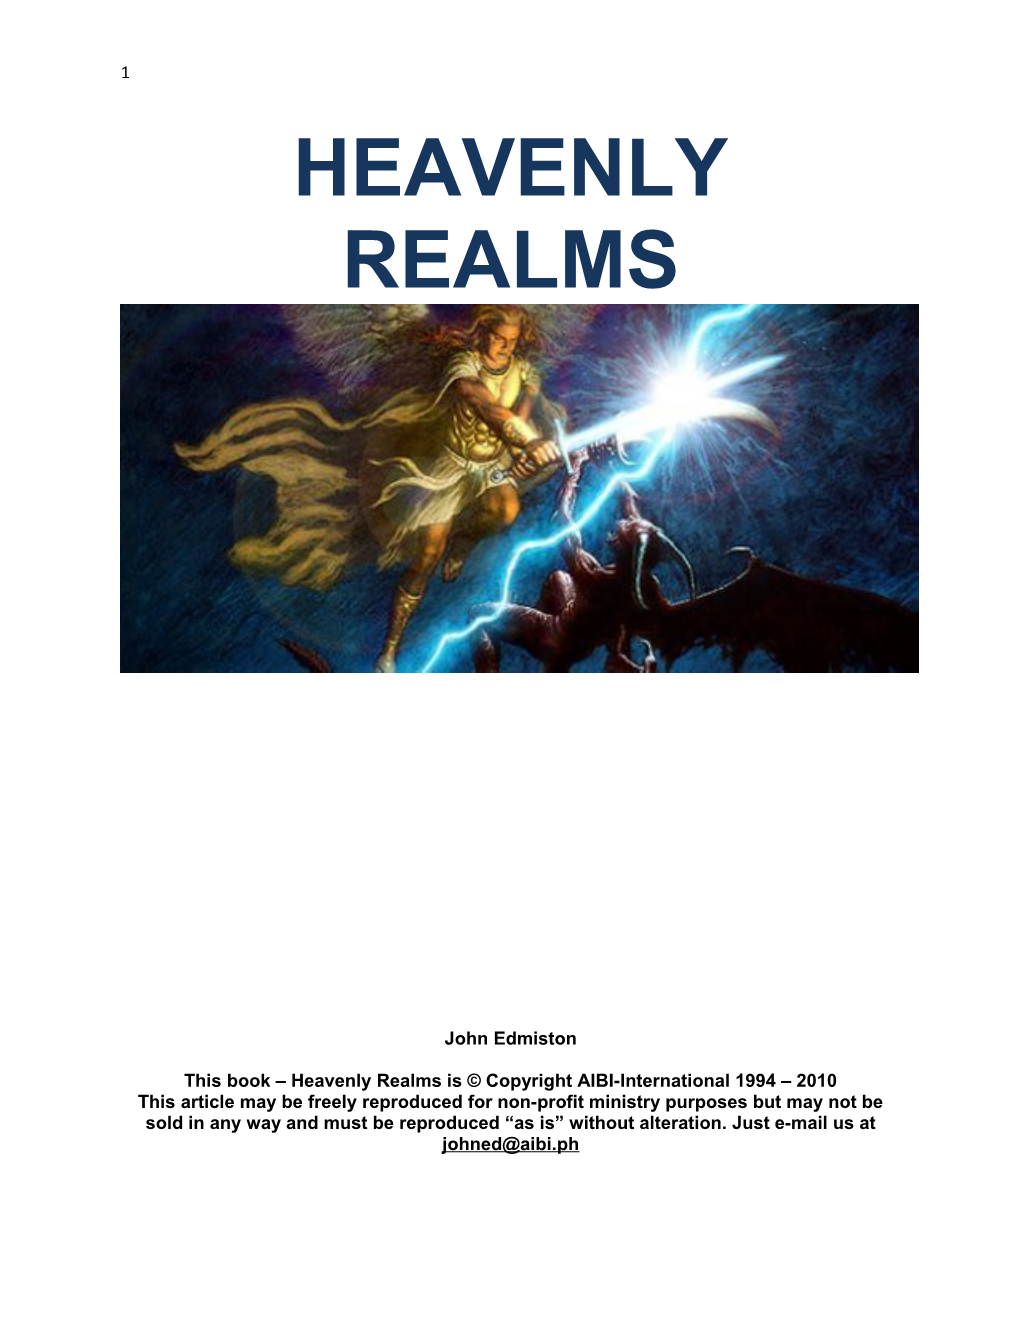 This Book Heavenly Realms Is Copyright AIBI-International 1994 2010